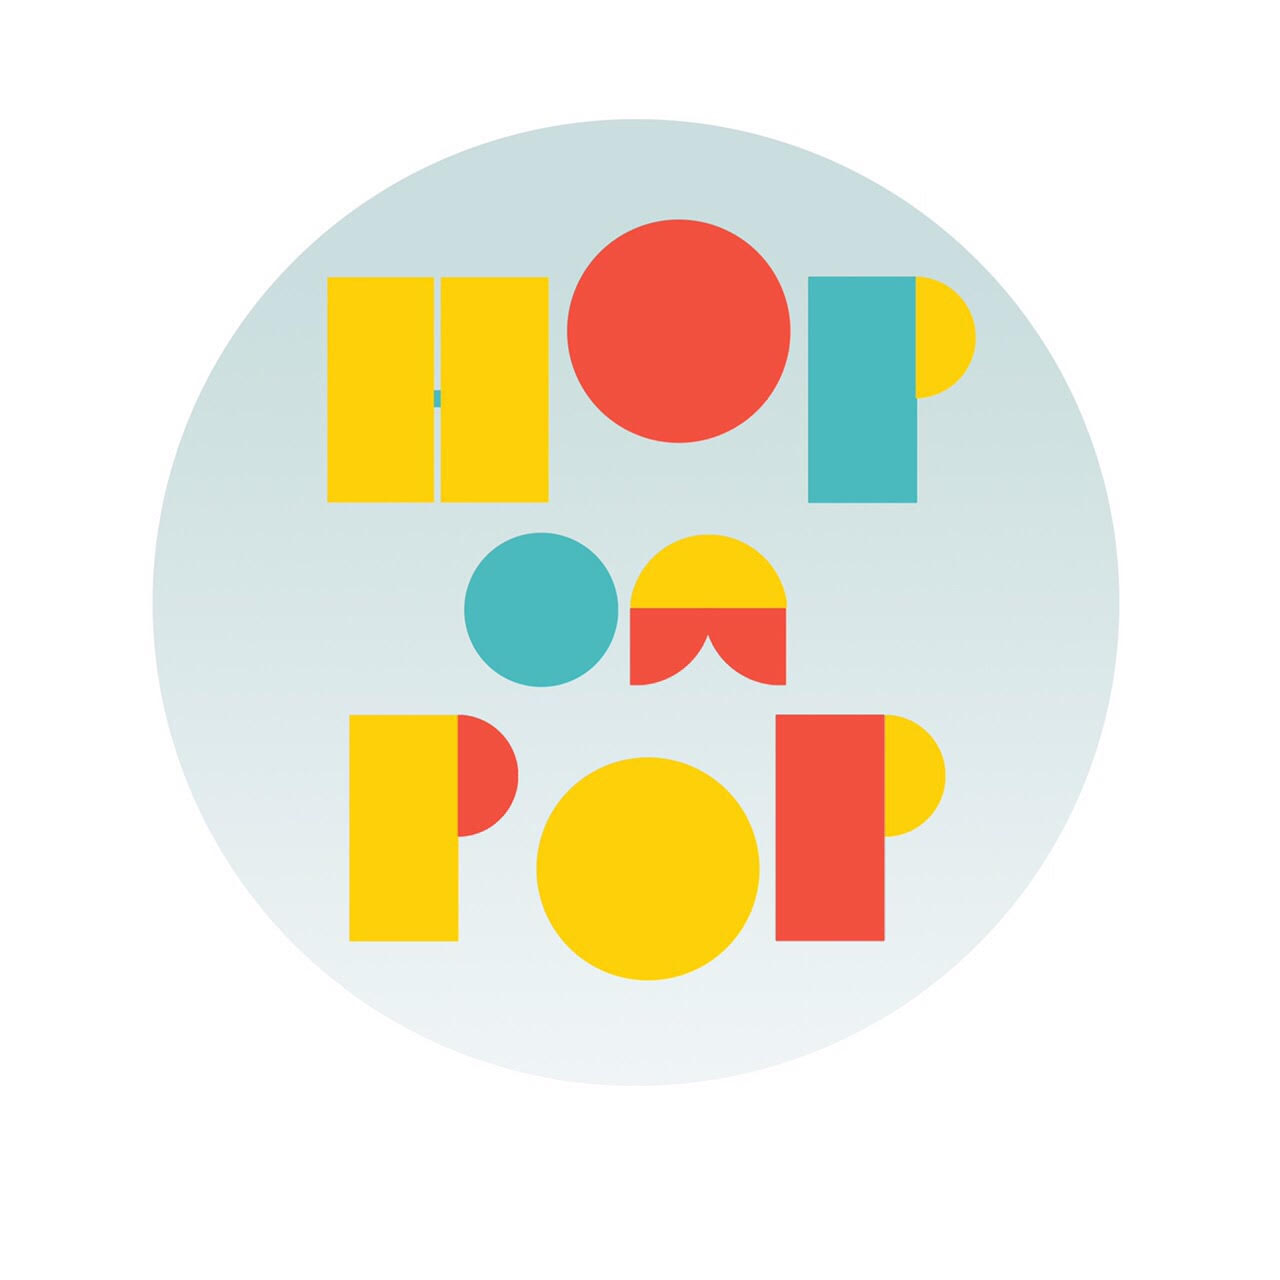 Newest Pop up in town :: Hop on Pop